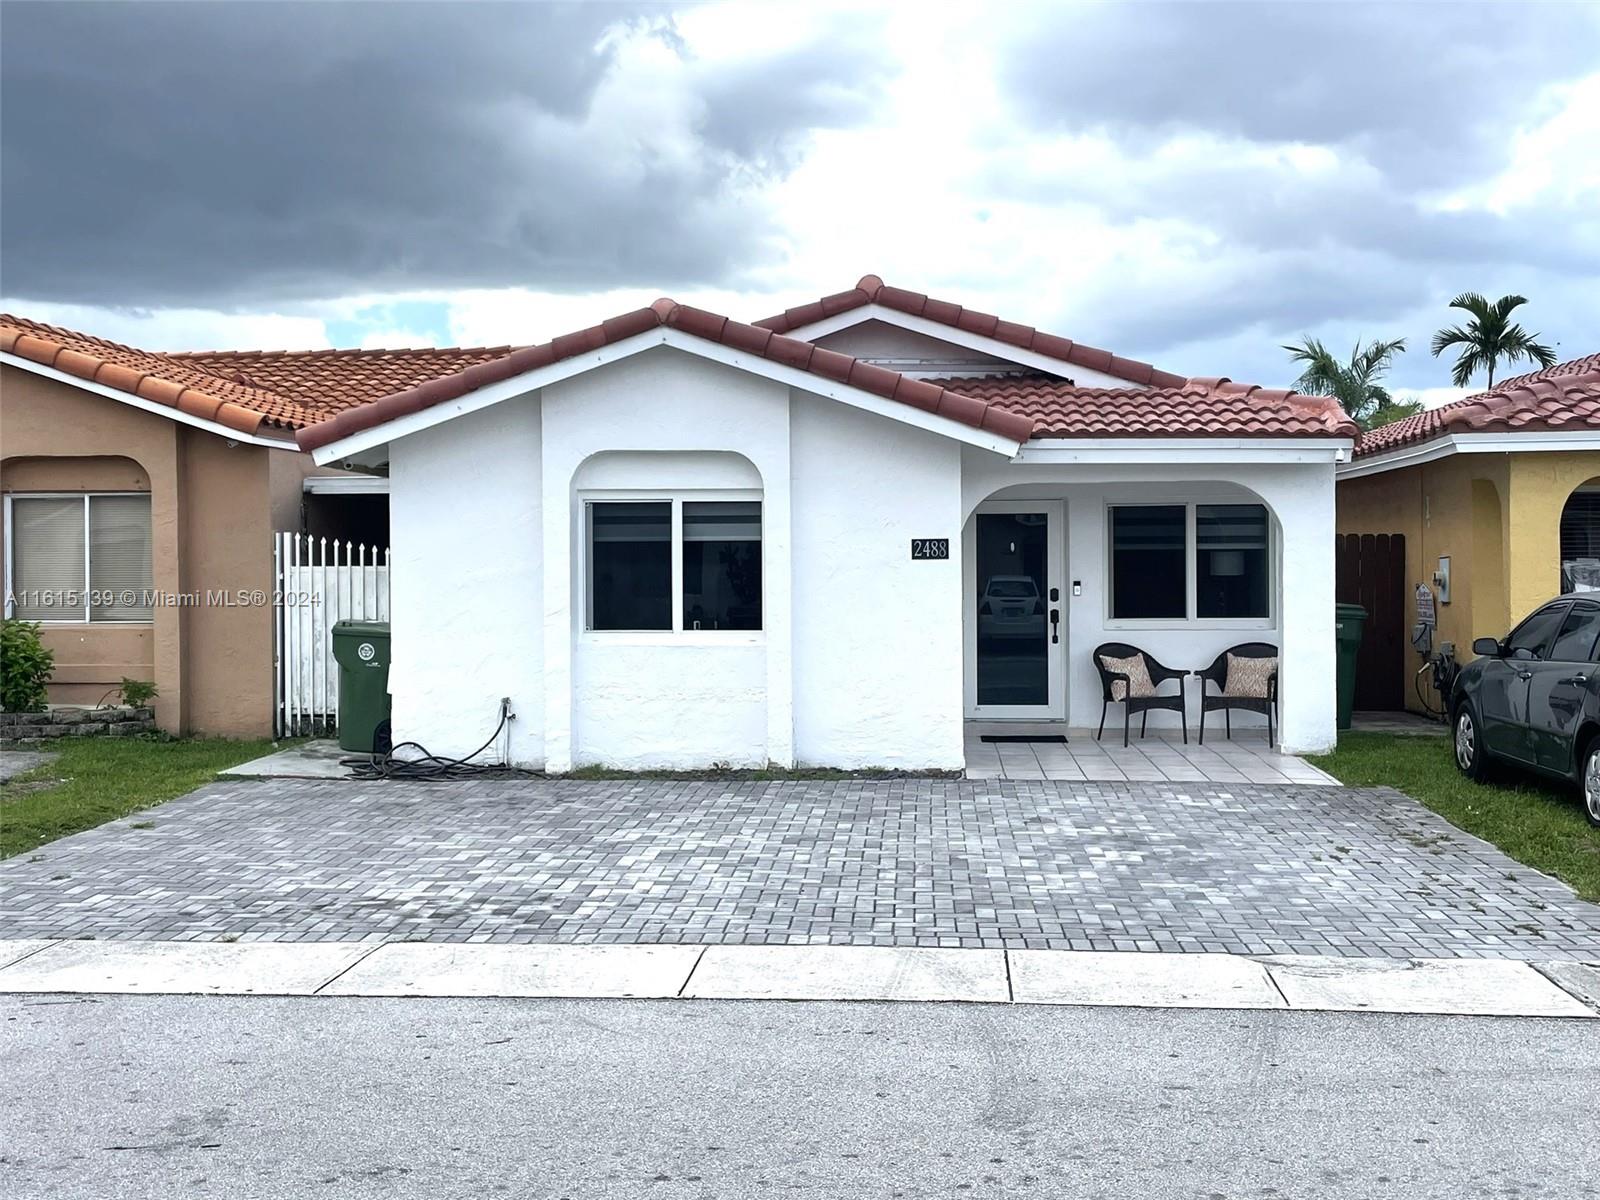 Property for Sale at 2488 W 65th St, Hialeah, Miami-Dade County, Florida - Bedrooms: 3 
Bathrooms: 2  - $474,900